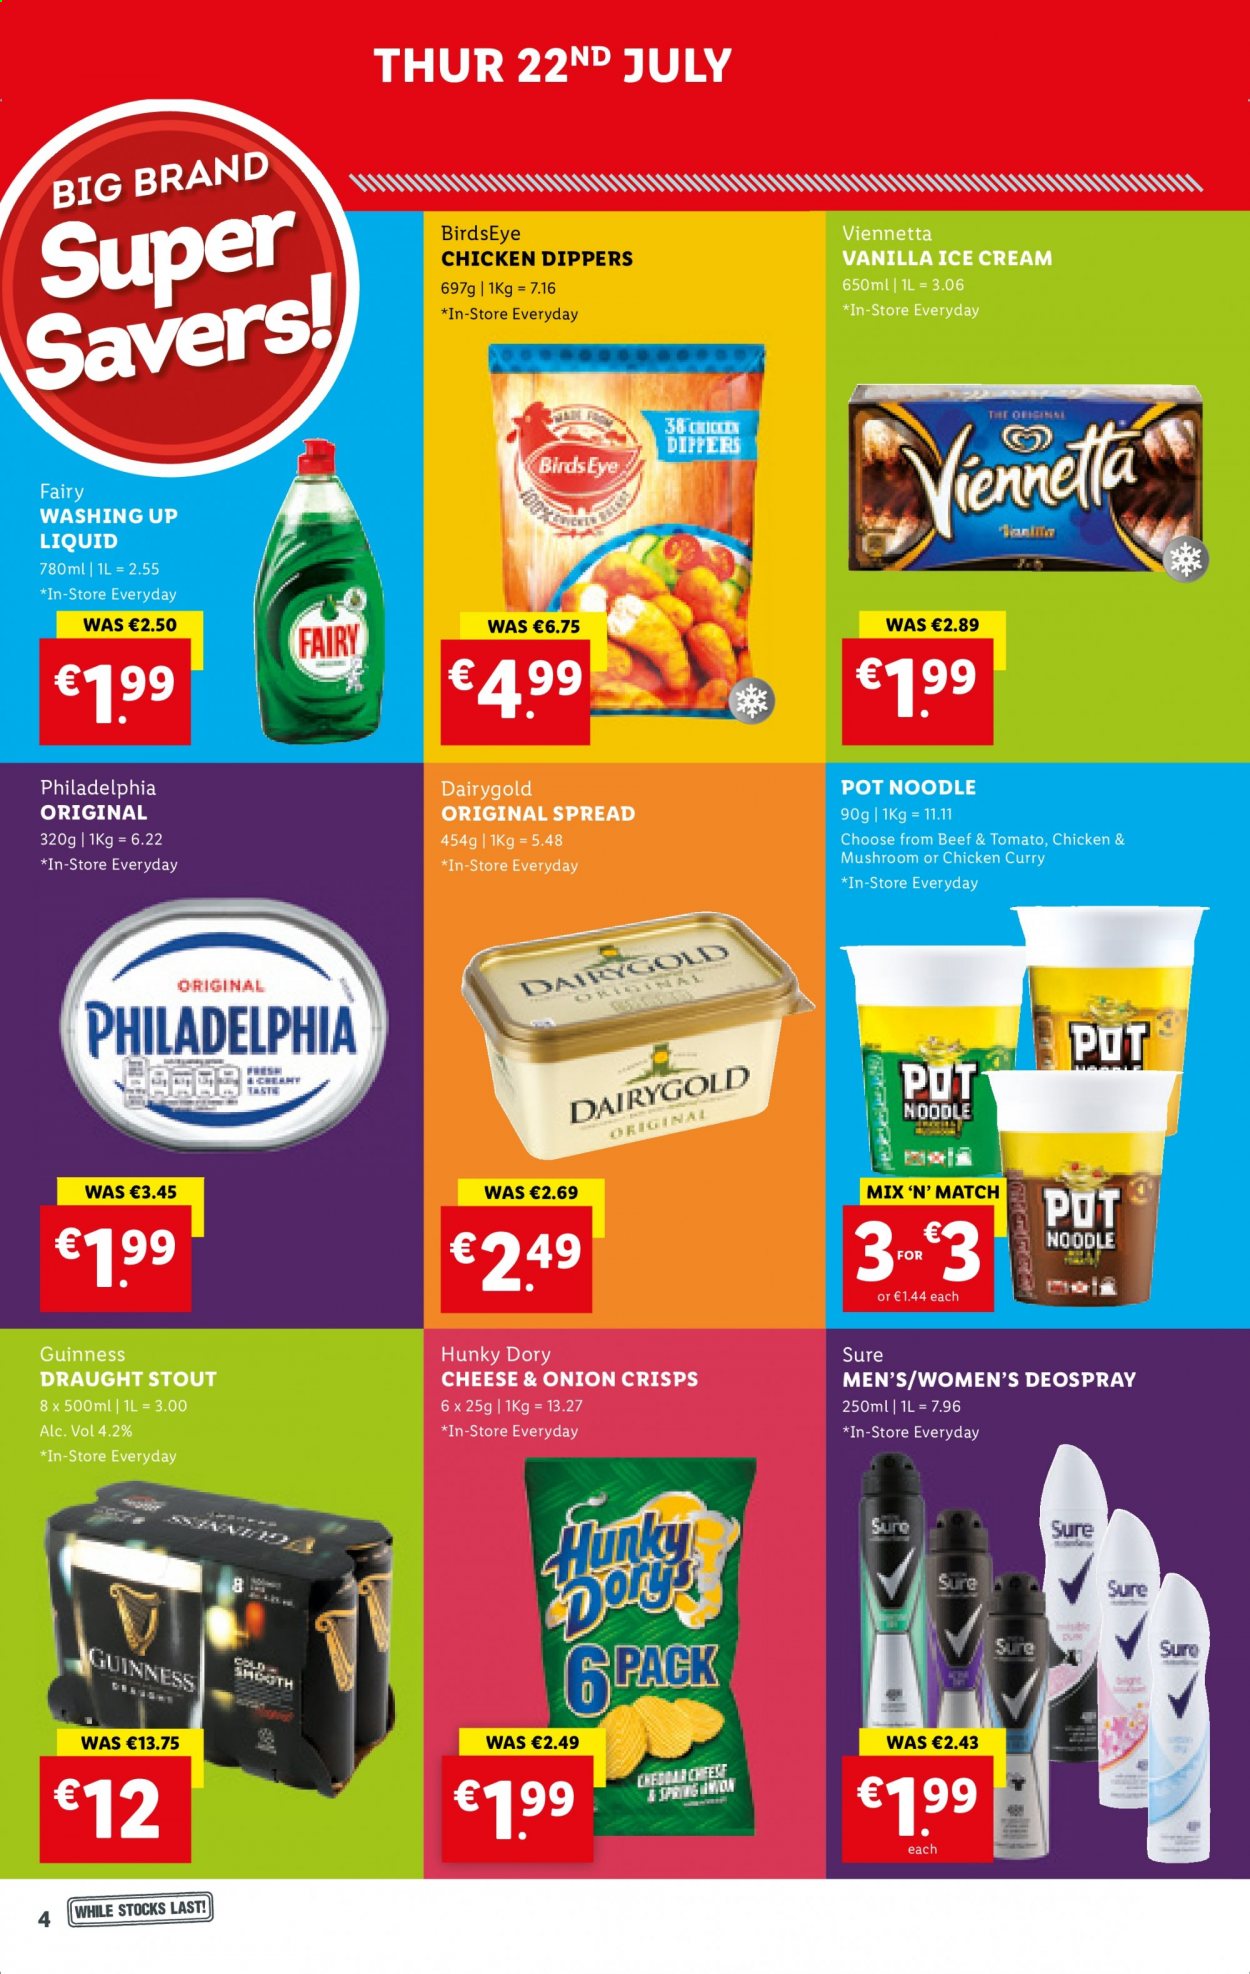 thumbnail - Lidl offer  - 22.07.2021 - 28.07.2021 - Sales products - Bird's Eye, noodles, Philadelphia, ice cream, chicken dippers, Guinness, Fairy, dishwashing liquid, Sure, pot. Page 4.